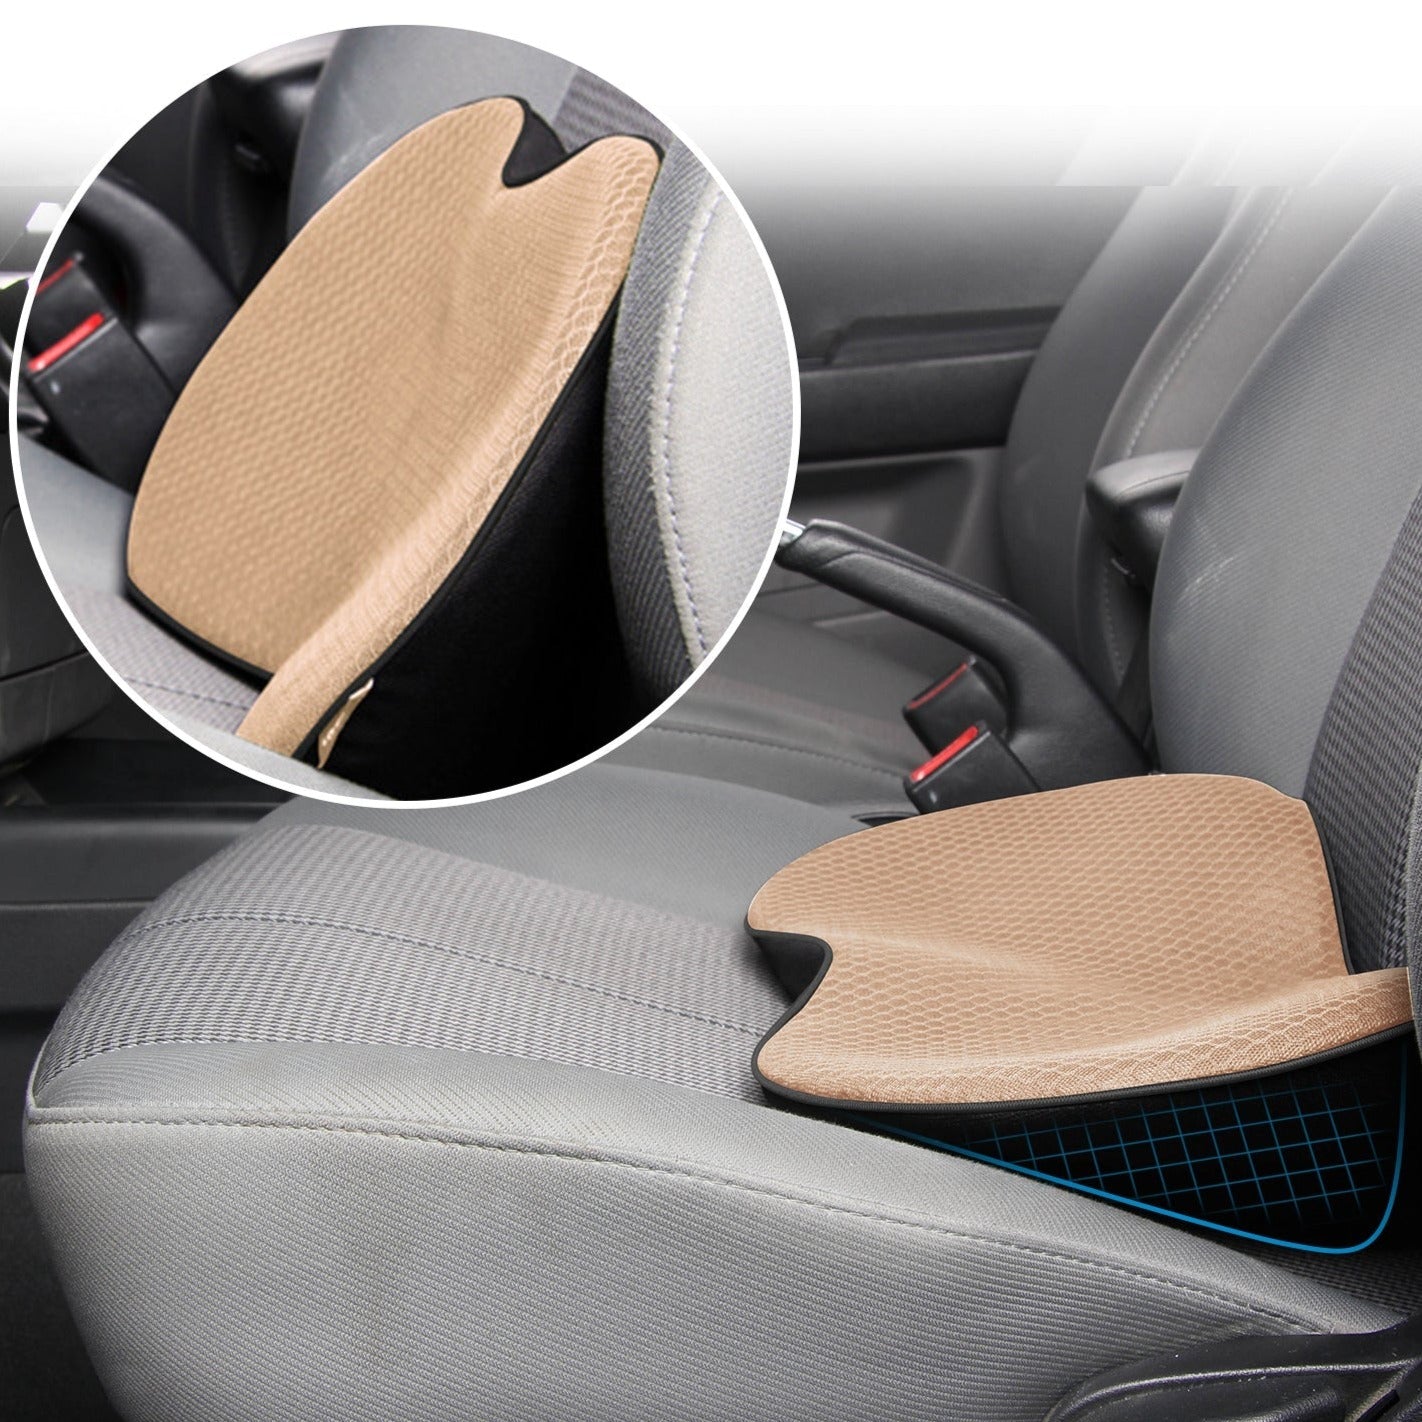 1 pcs Seat Cushion For Car Seat Driver，Car Seat Cushions For Short People